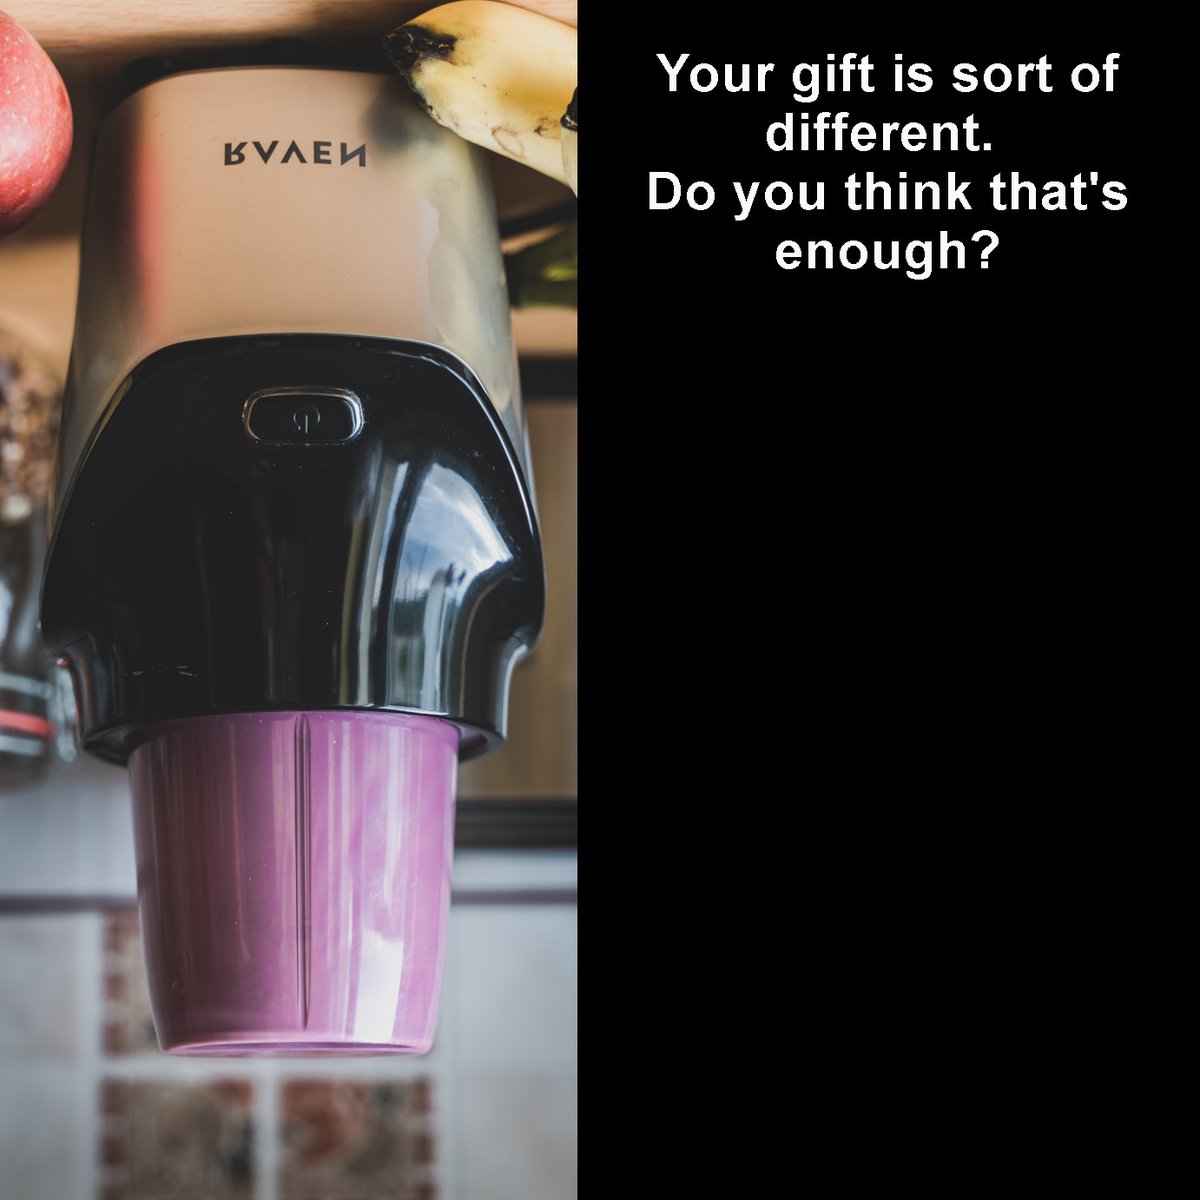 Your gift is slightly different. Do you think that'll be enough? Get a gift that matters: OddGiftFinder.com
(#gift, #weddingGift, #anniversary, #anniversaryGift, #weddingPresent, #appliance, #blender, #giftIdea, #smallGift, #largeGift, #surpriseGift, #unique,  #unusual)